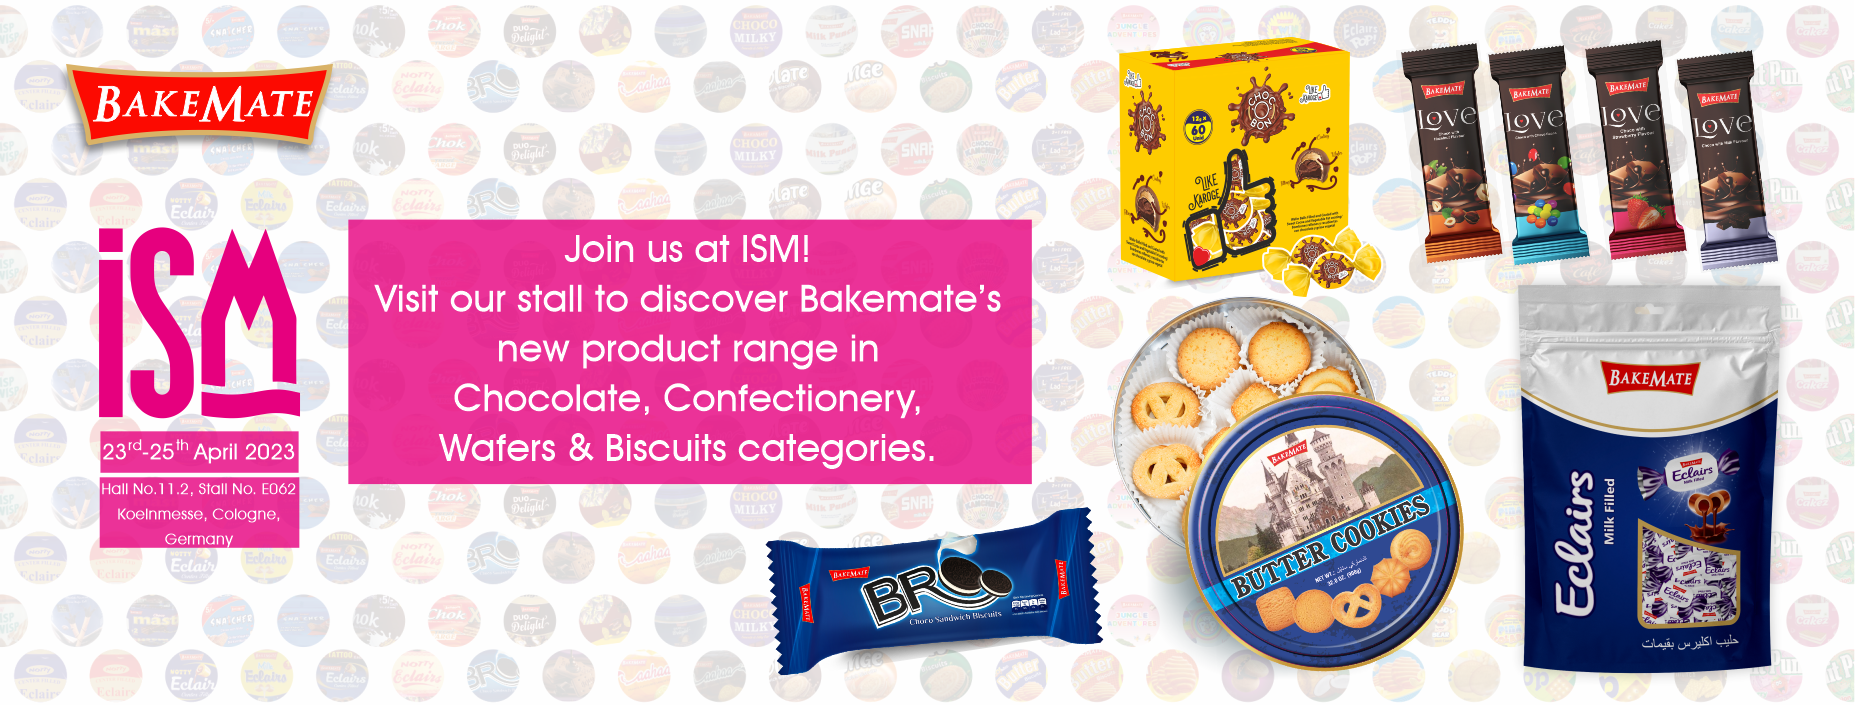 ISM Cologne 2023 - The World's Largest Trade Fair for Sweets and Biscuits, from 23rd to 25th April in Cologne, Germany HALL NO. 11.2, stall No. E-062 Date: 23rd to 25th April, 2023 Koelnmesse, Cologne. ISM 2023 | ISM Cologne | ism 2023 Cologne | ISM Germany | ISM BakeMate | ISM Event 2023 | ISM Expo 2023